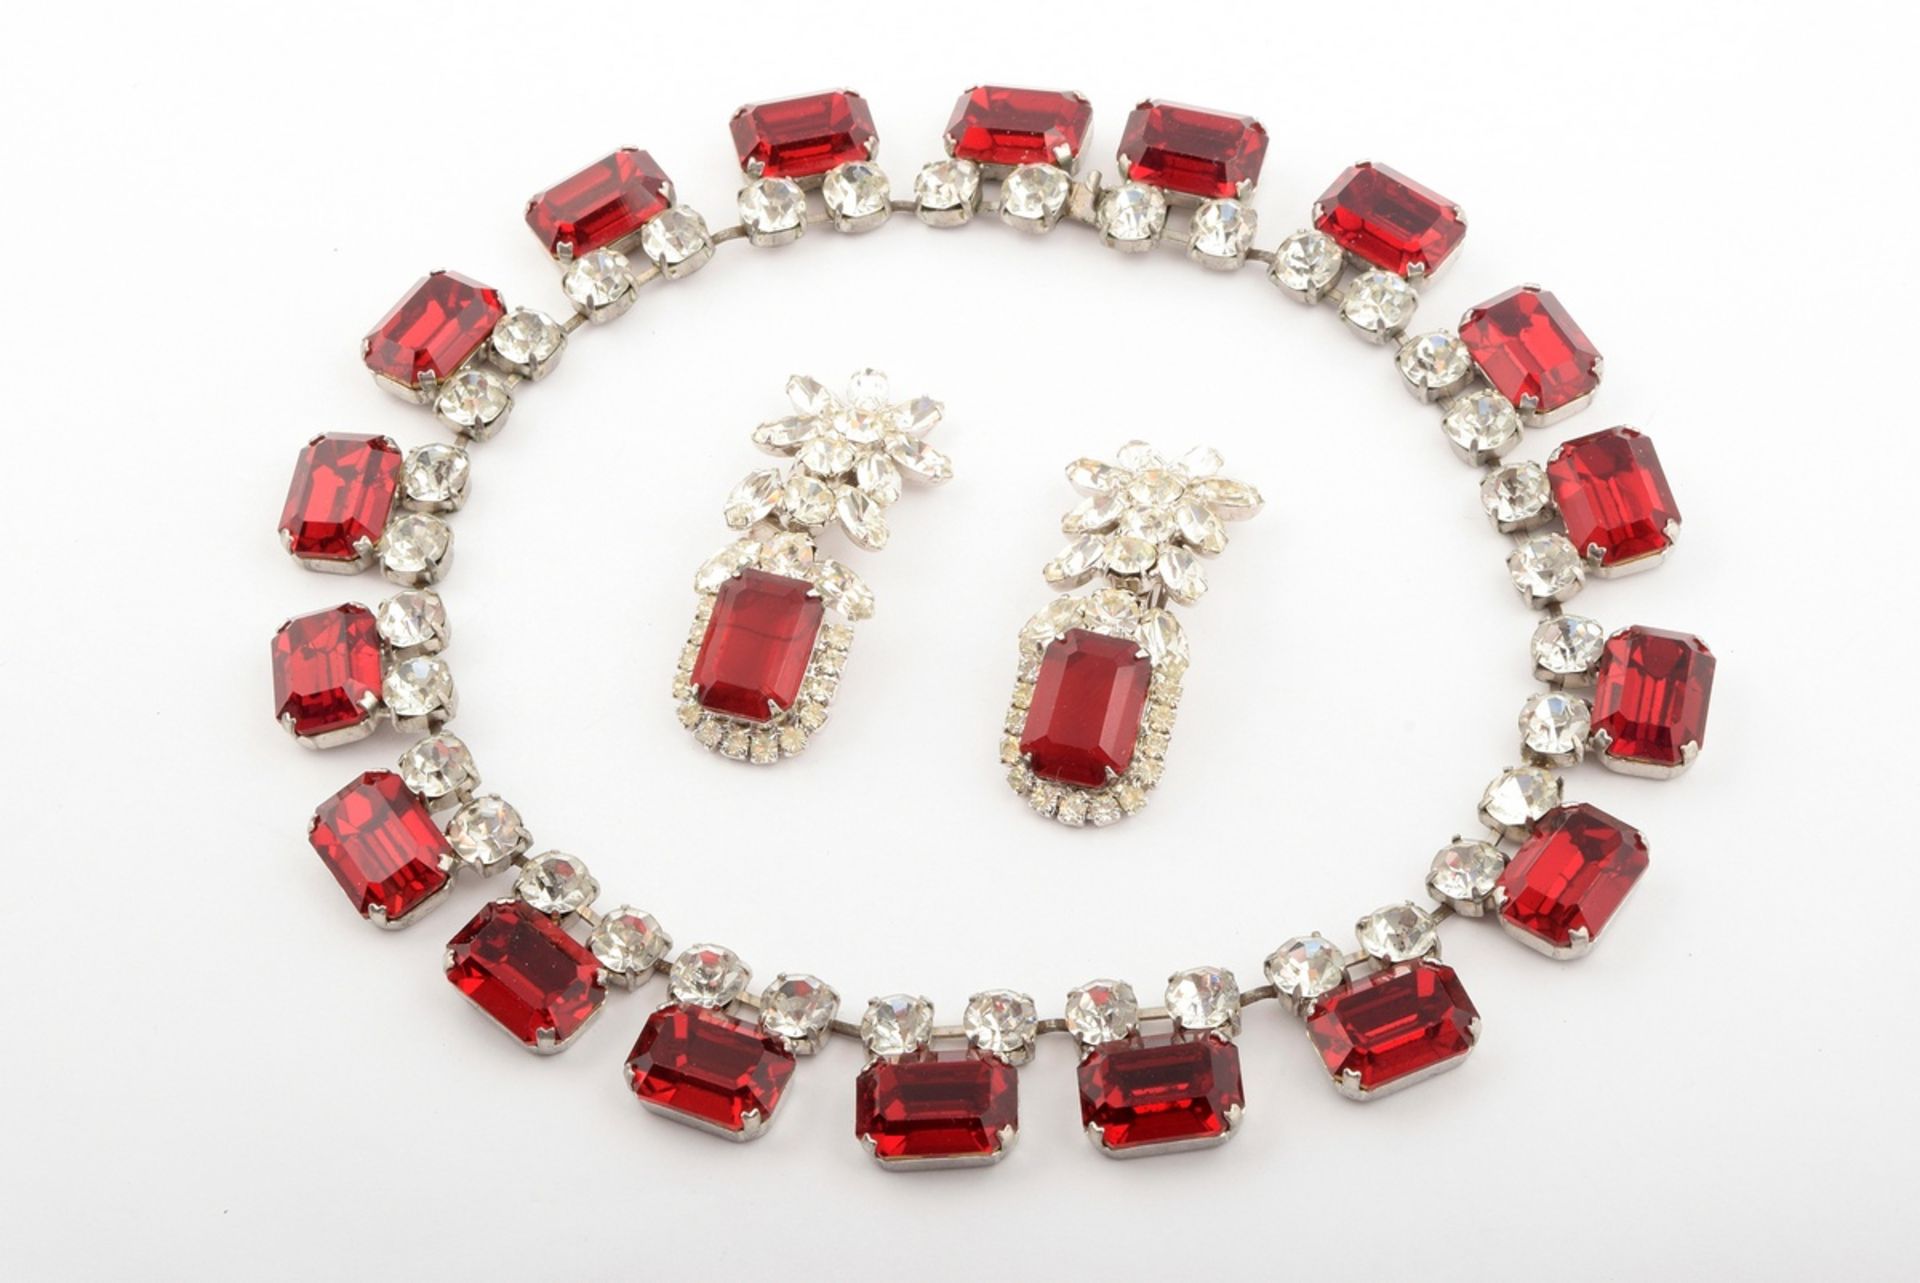 3 pieces of opulent Midcentury costume jewellery made of white metal with red and white rhinestones - Image 2 of 5